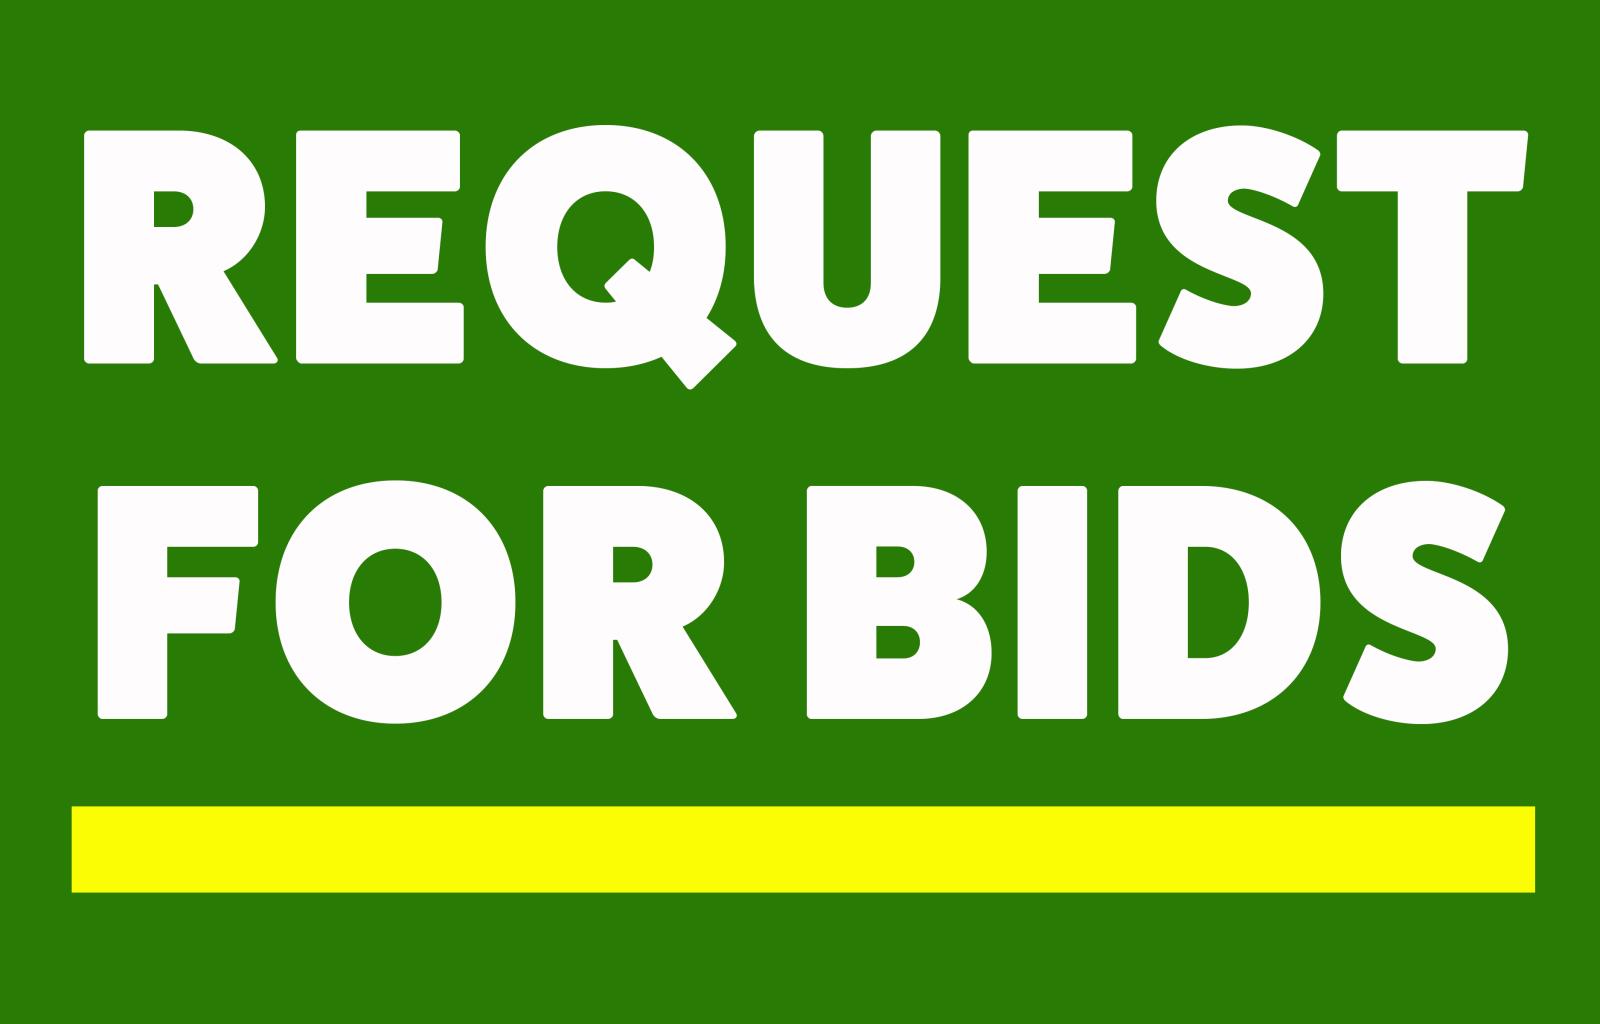 Request for Bids